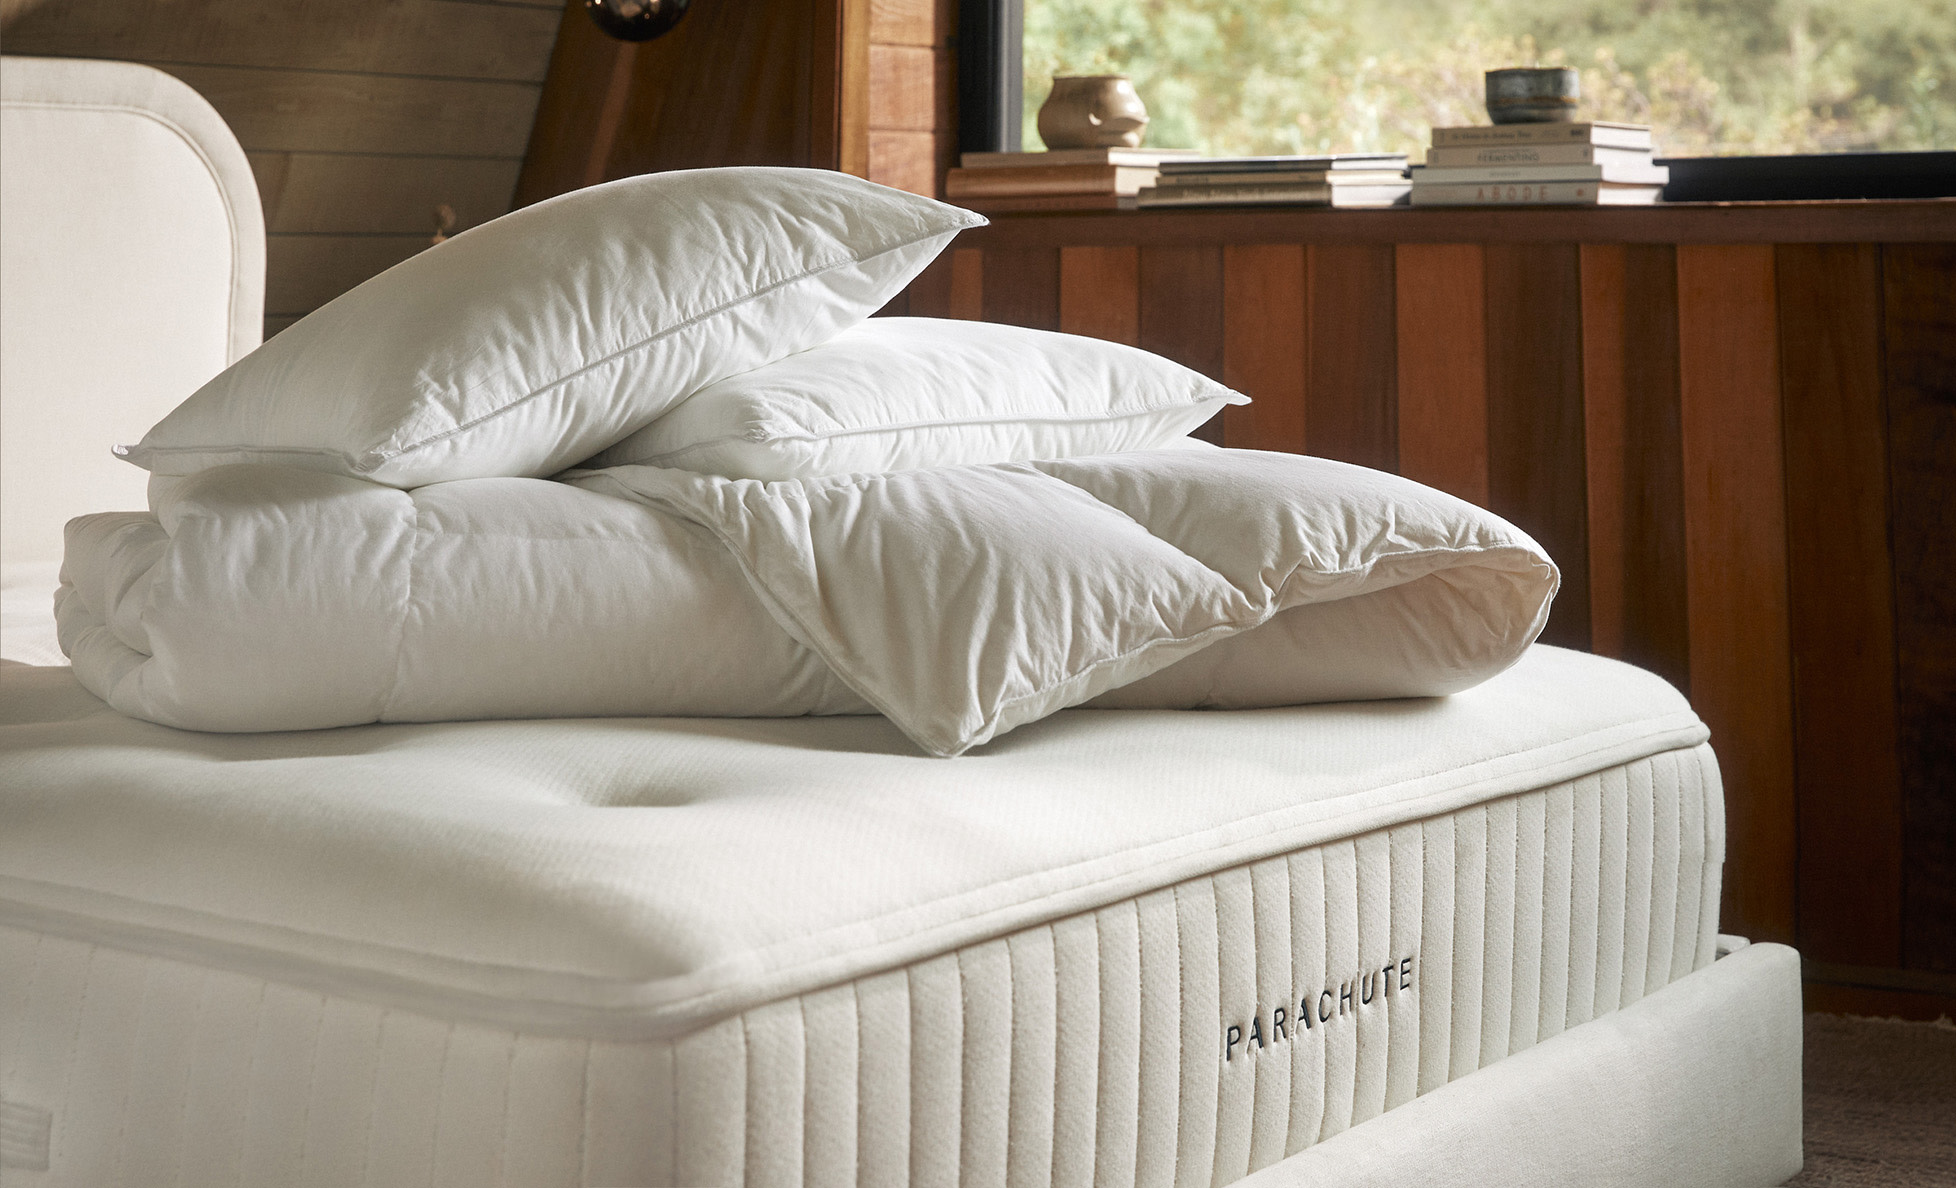 A bare mattress with pillow and duvet inserts stacked atop